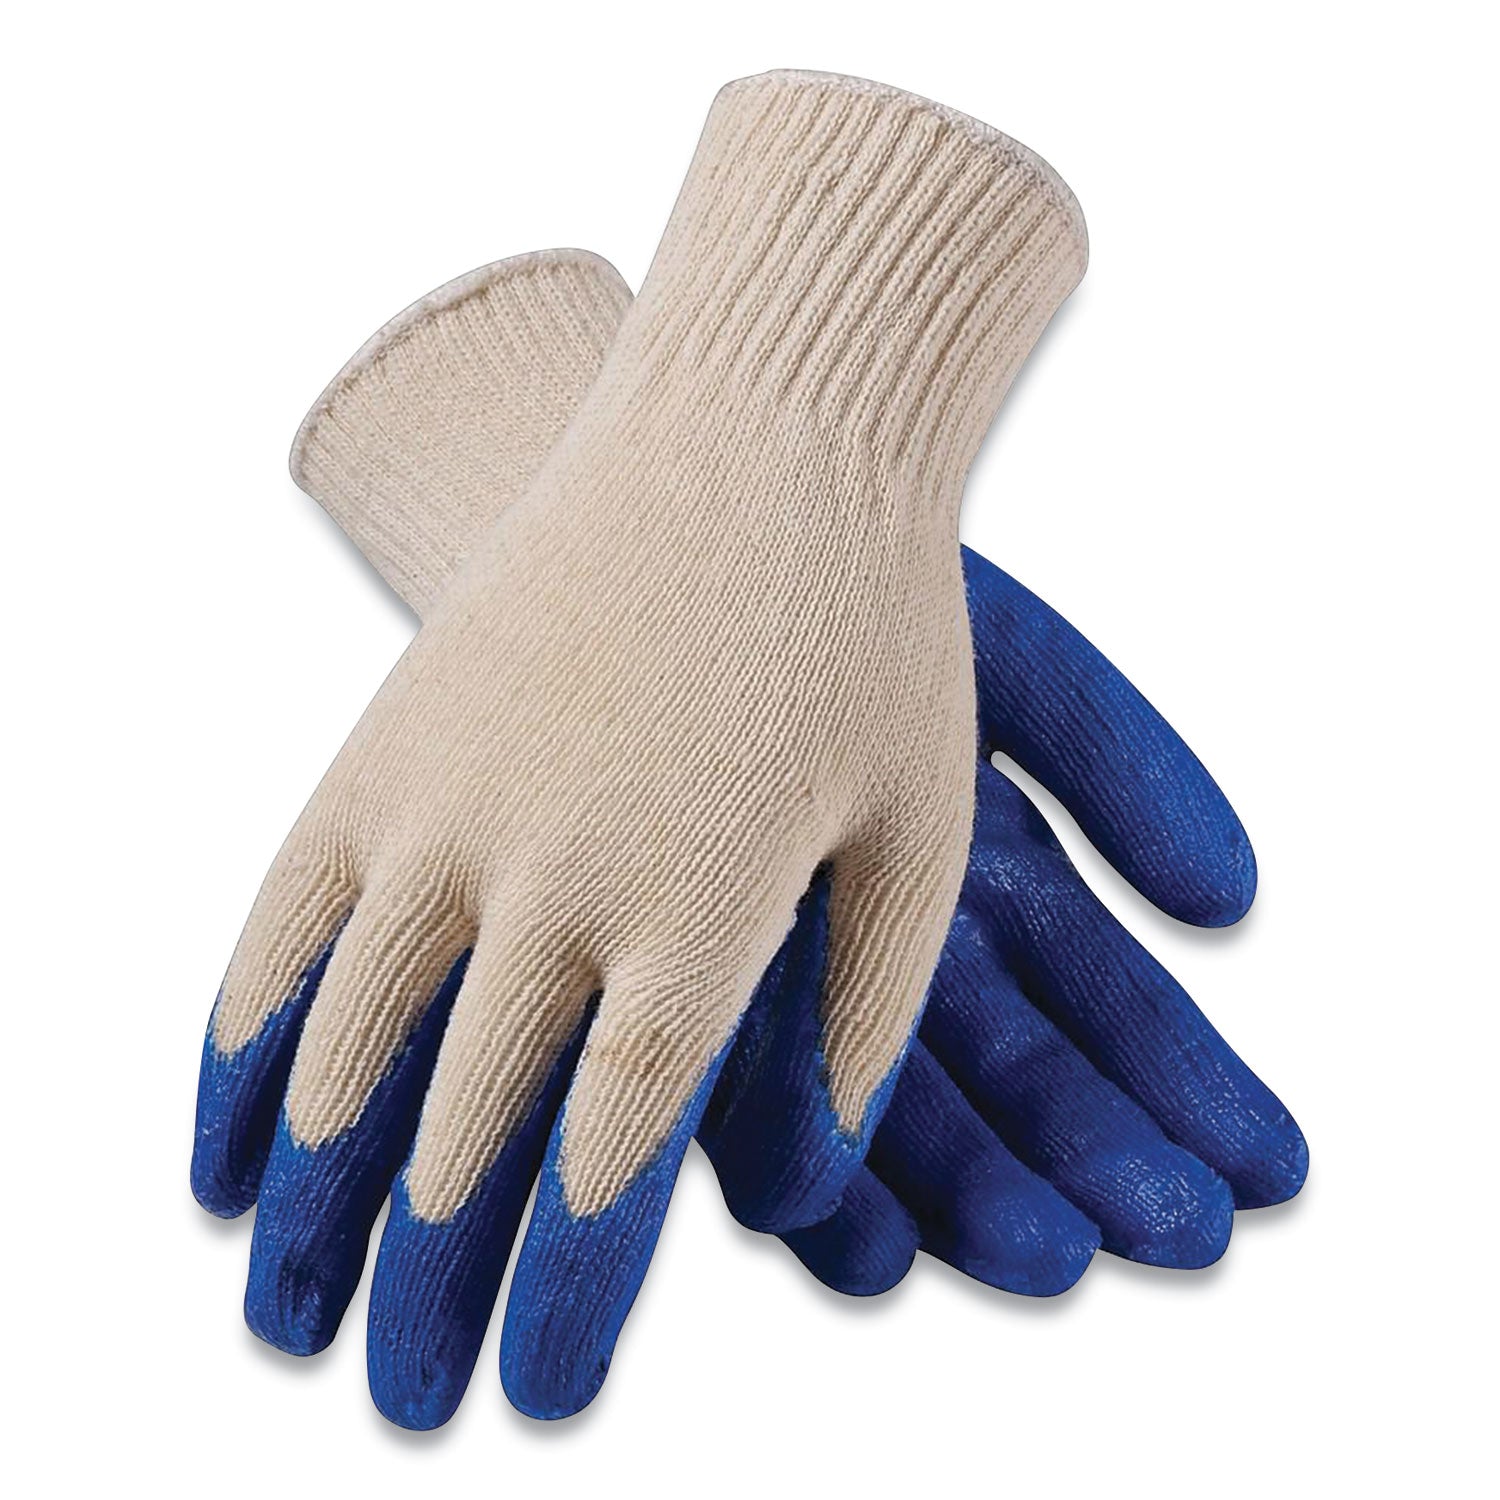 Seamless Knit Cotton-polyester Gloves, Regular Grade, Small, White-blue, 12 Pairs